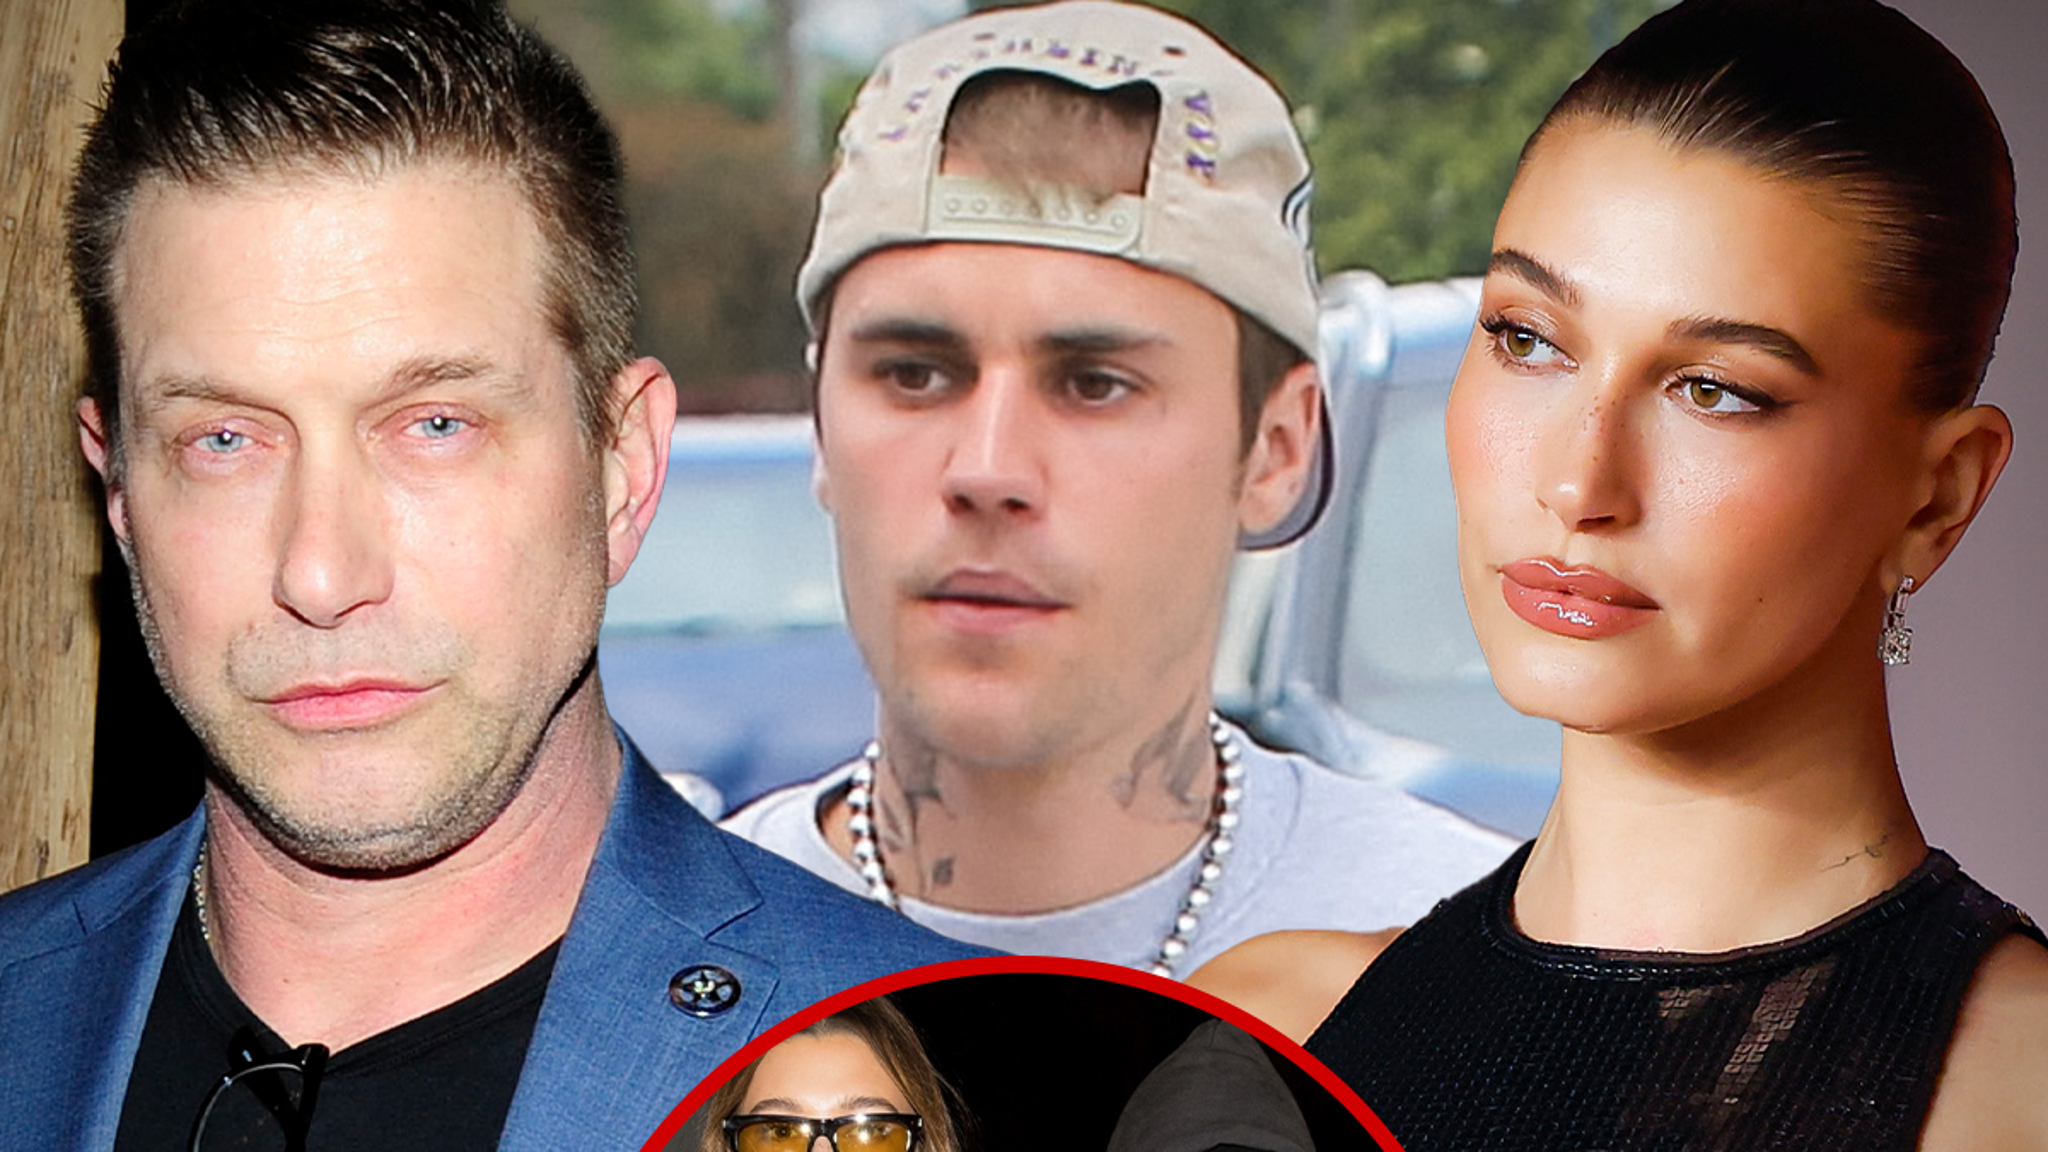 Justin Biebers Wife Hailey Is Not Happy With Her Father Stephen Baldwin For Publicly Asking